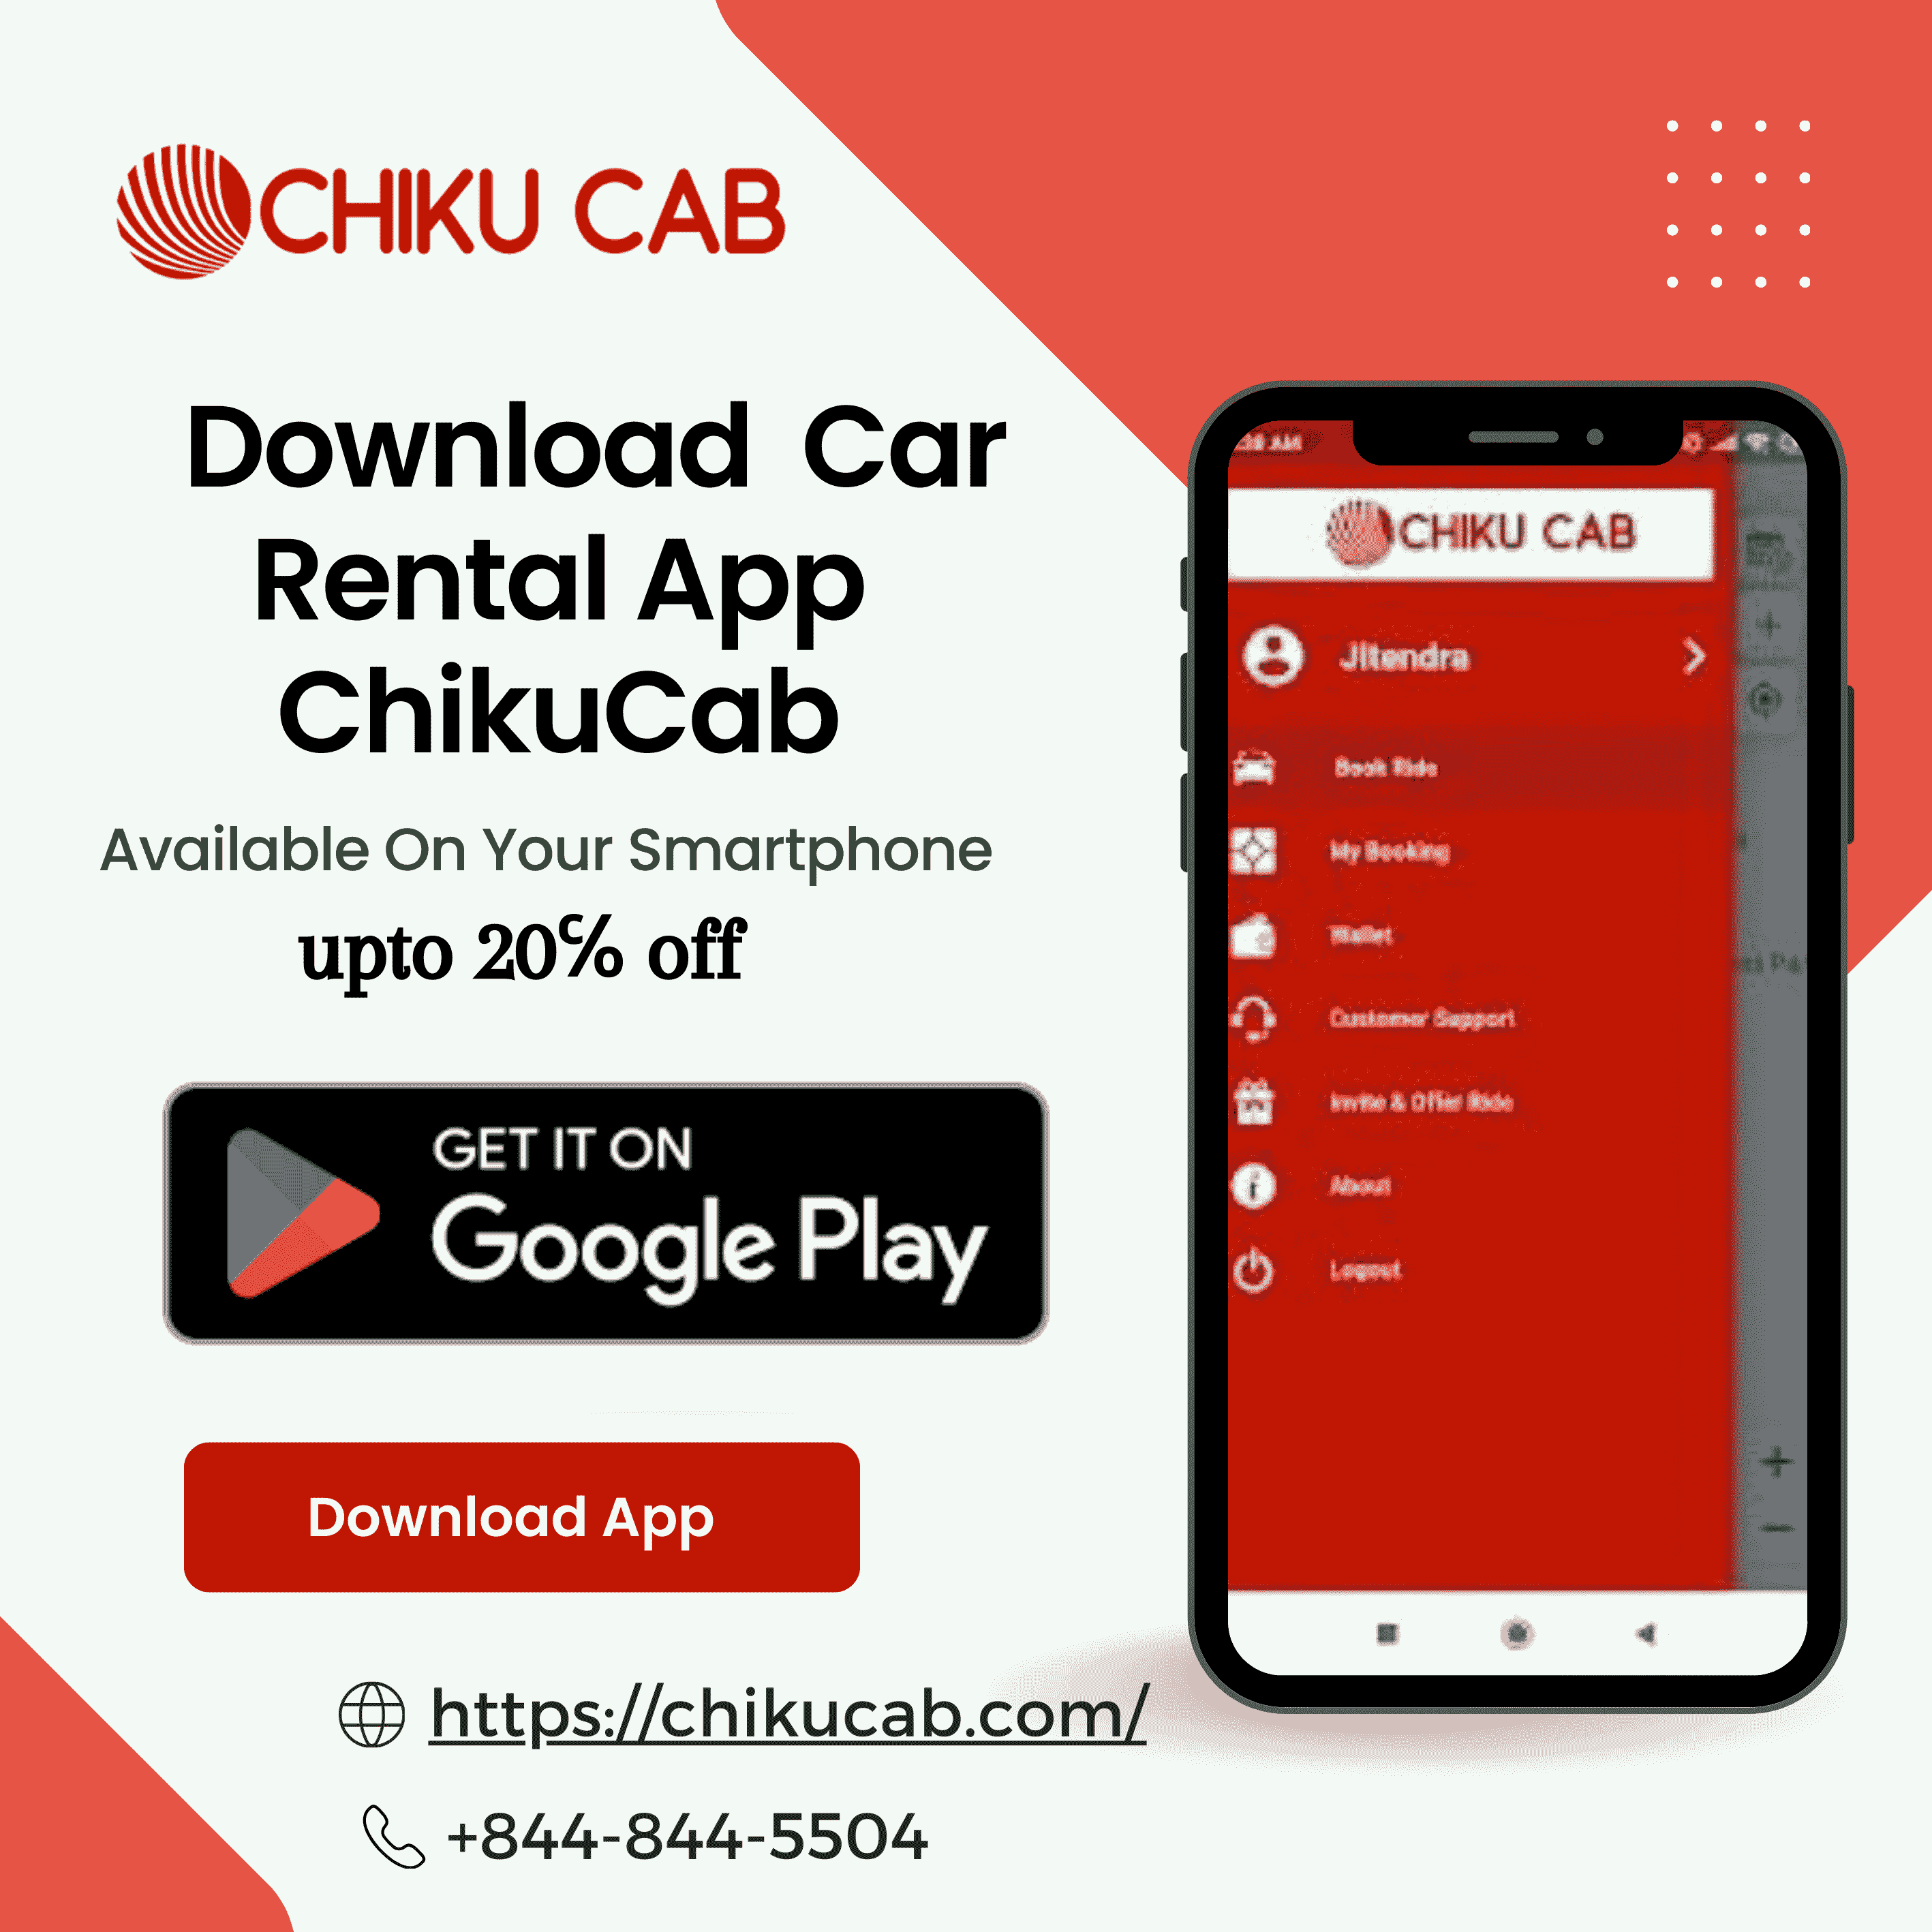 Simplify Your Travel with ChikuCab's Car Rental App